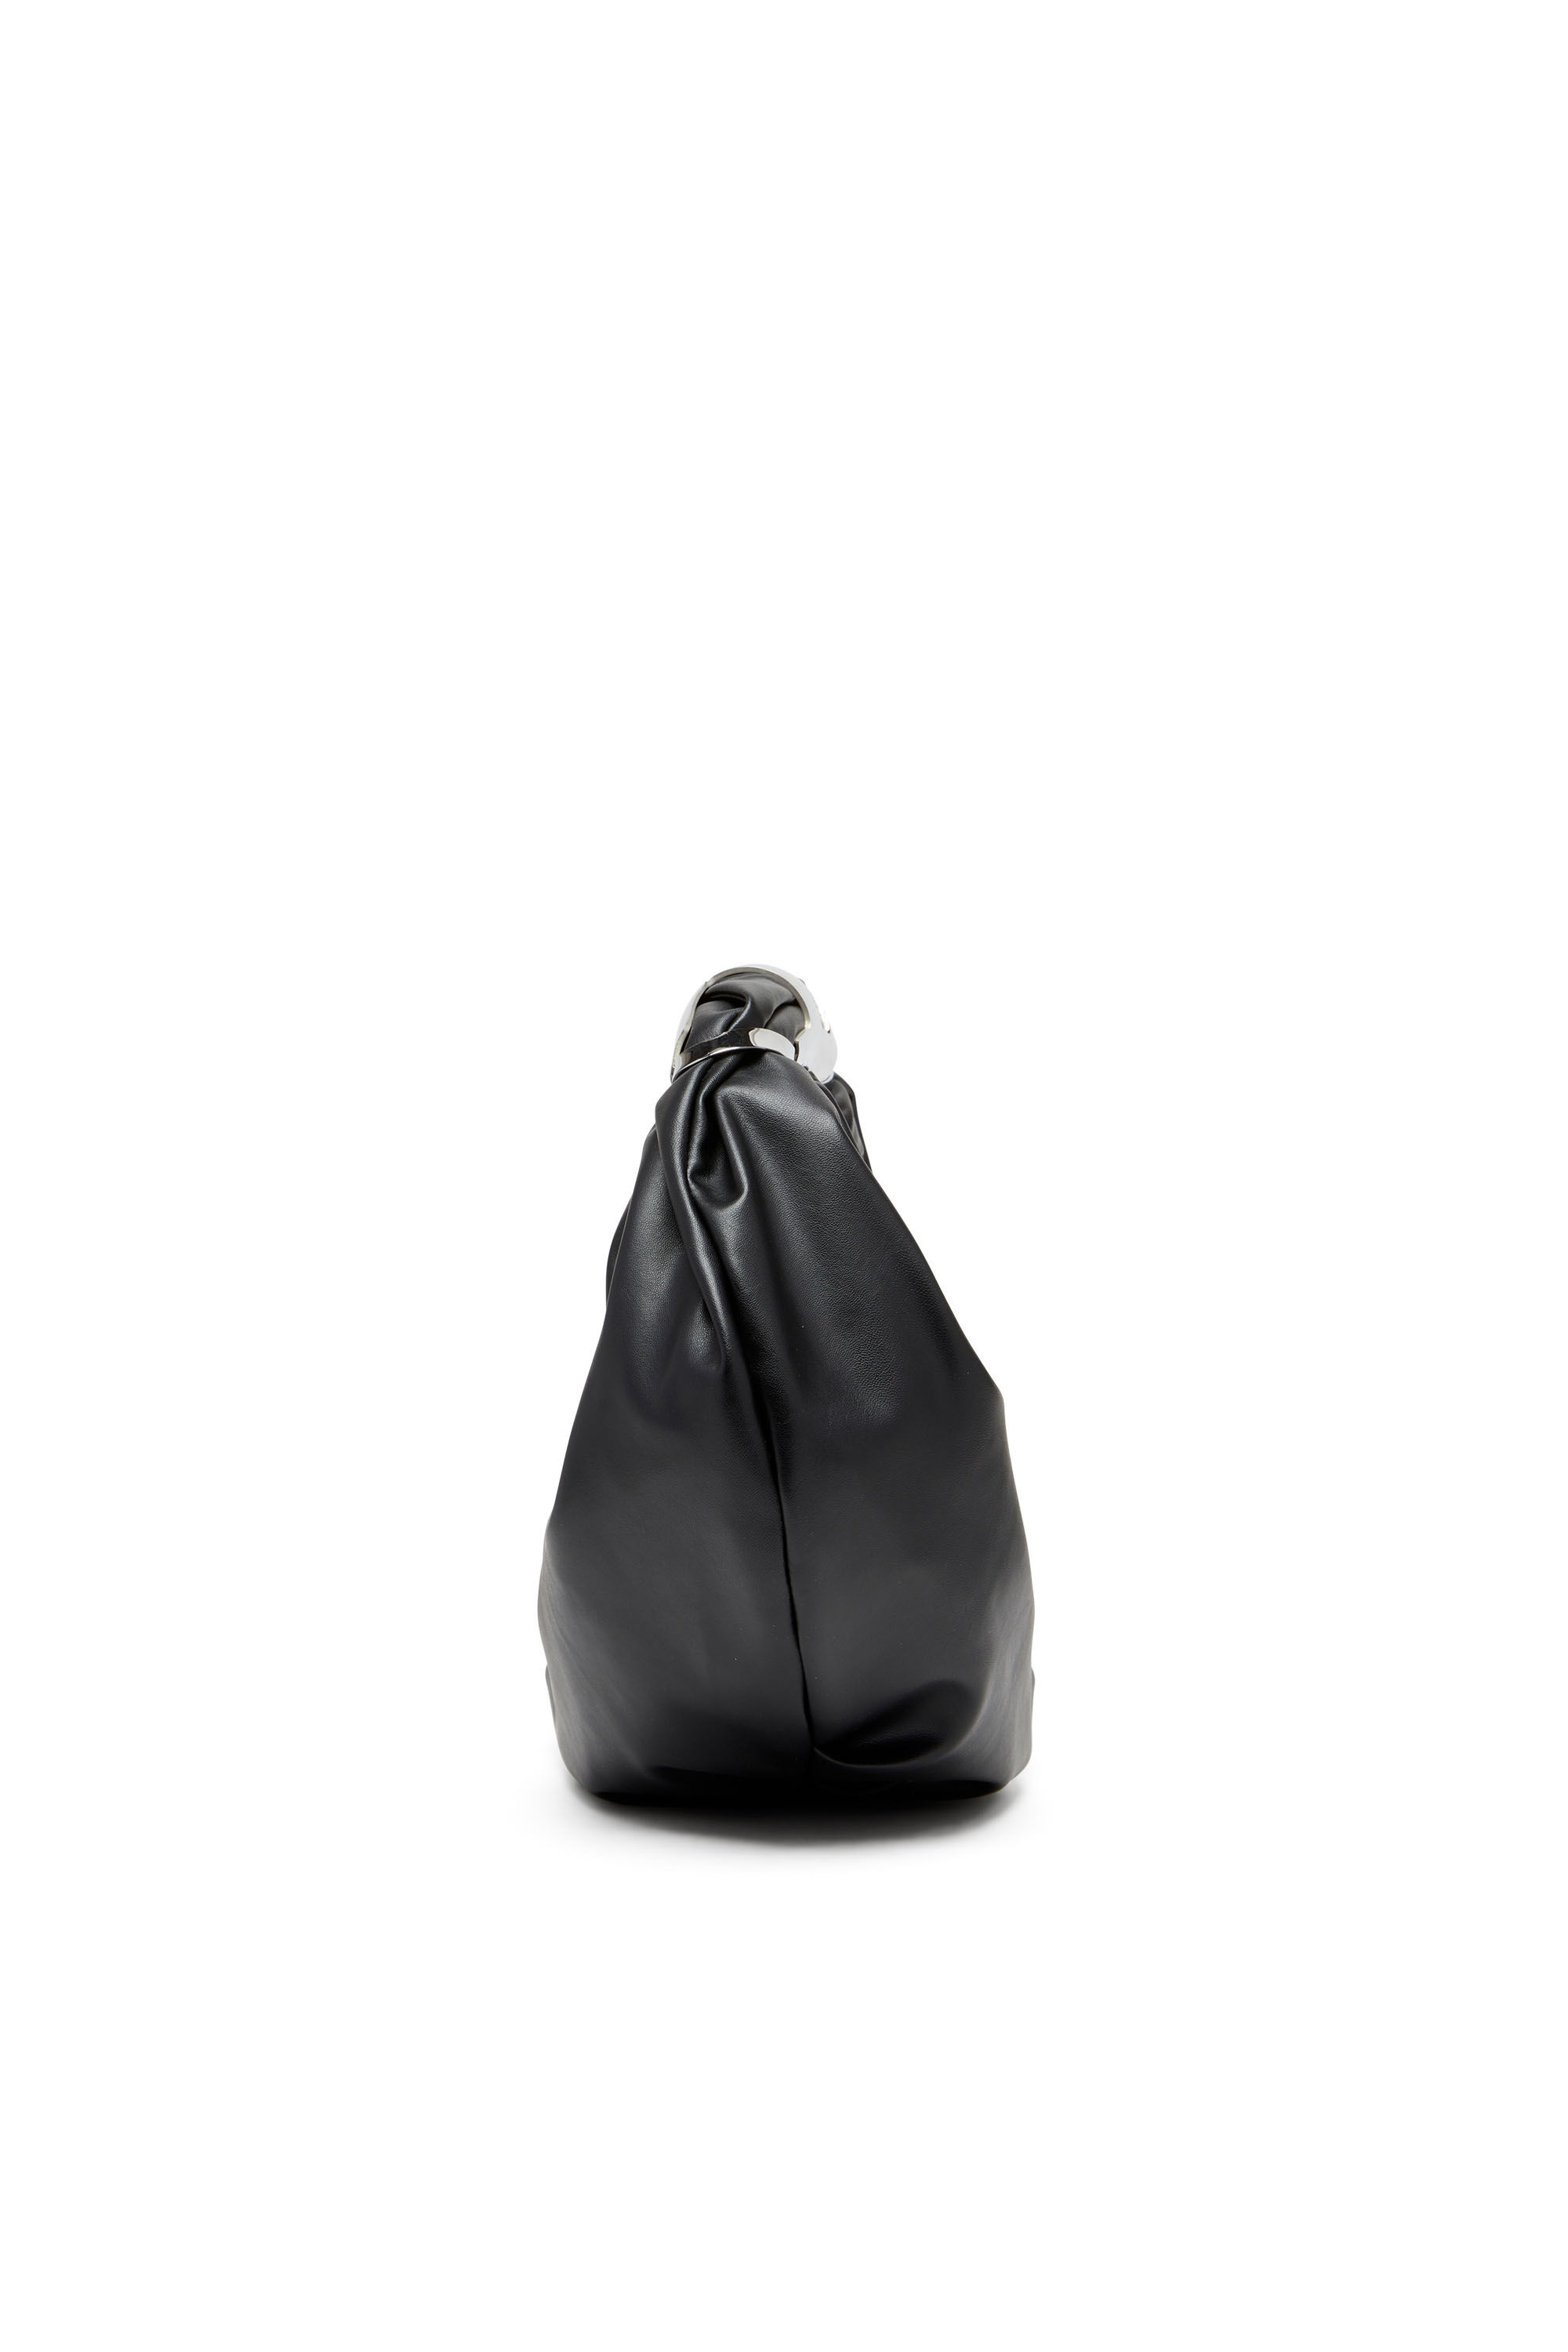 GRAB-D HOBO S Grab-D S-Hobo bag with Oval D handle｜ブラック 